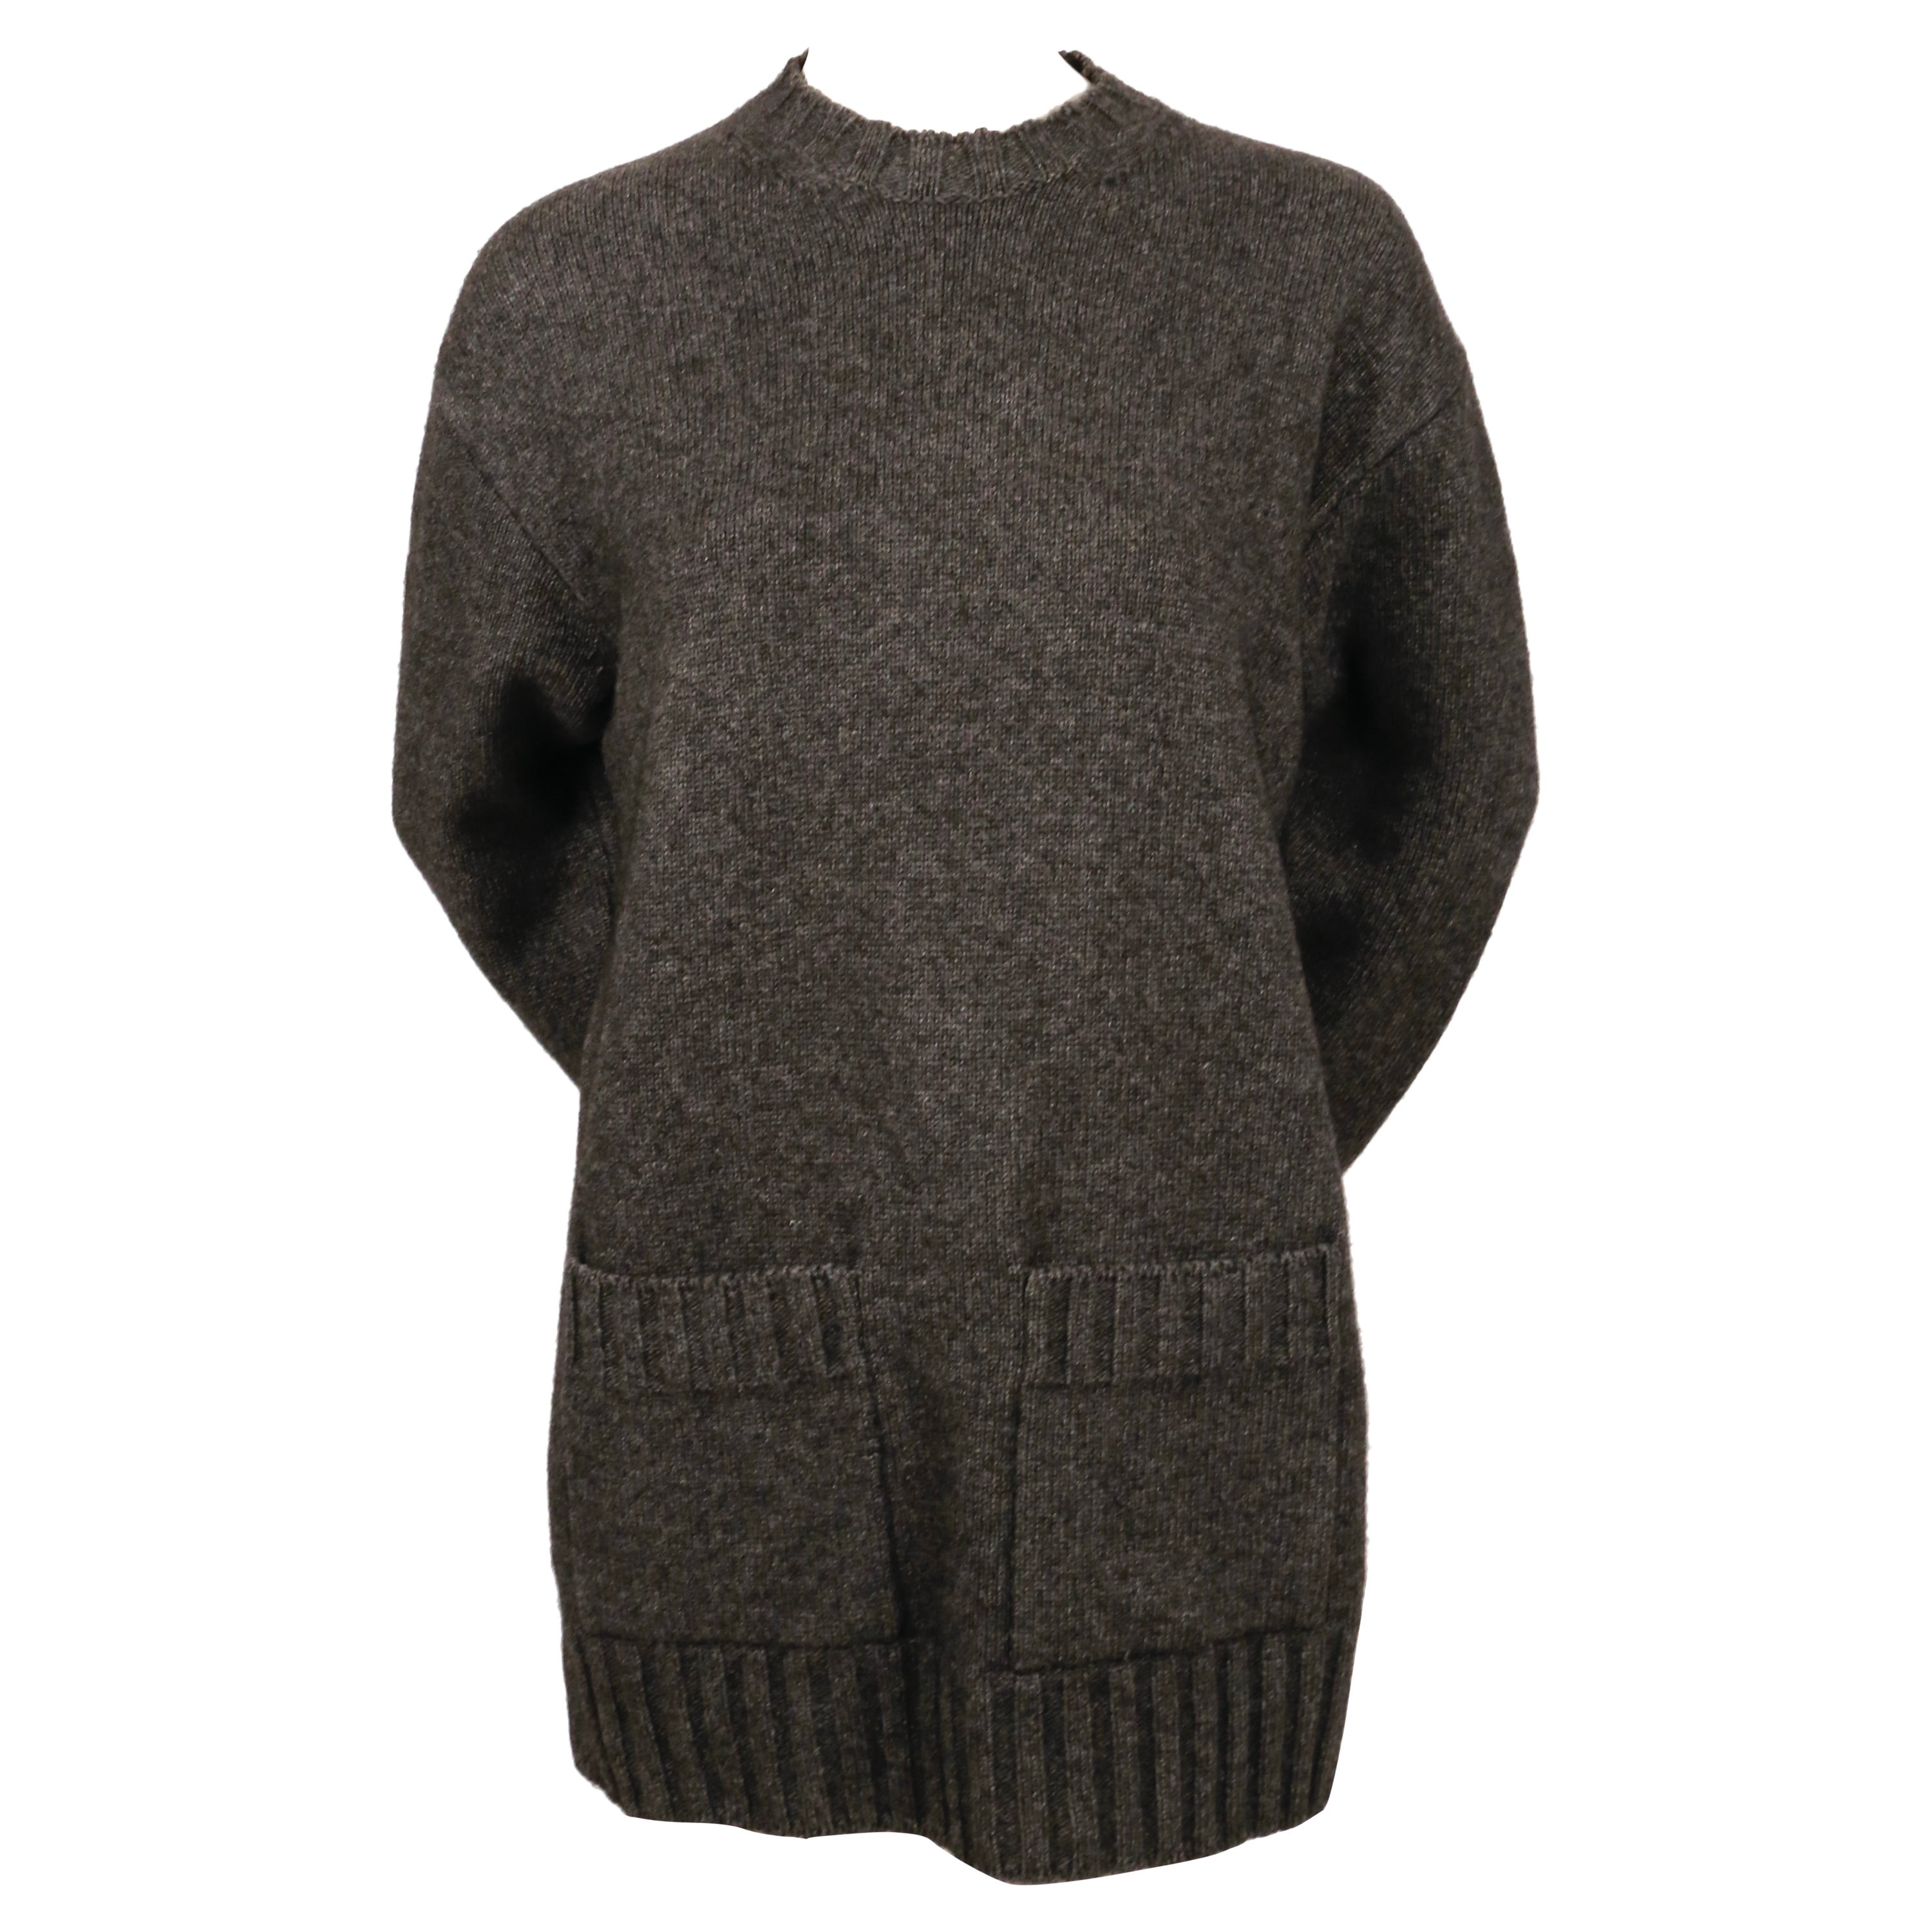 CELINE by PHOEBE PHILO marled dark grey sweater with patch pocket and split side For Sale